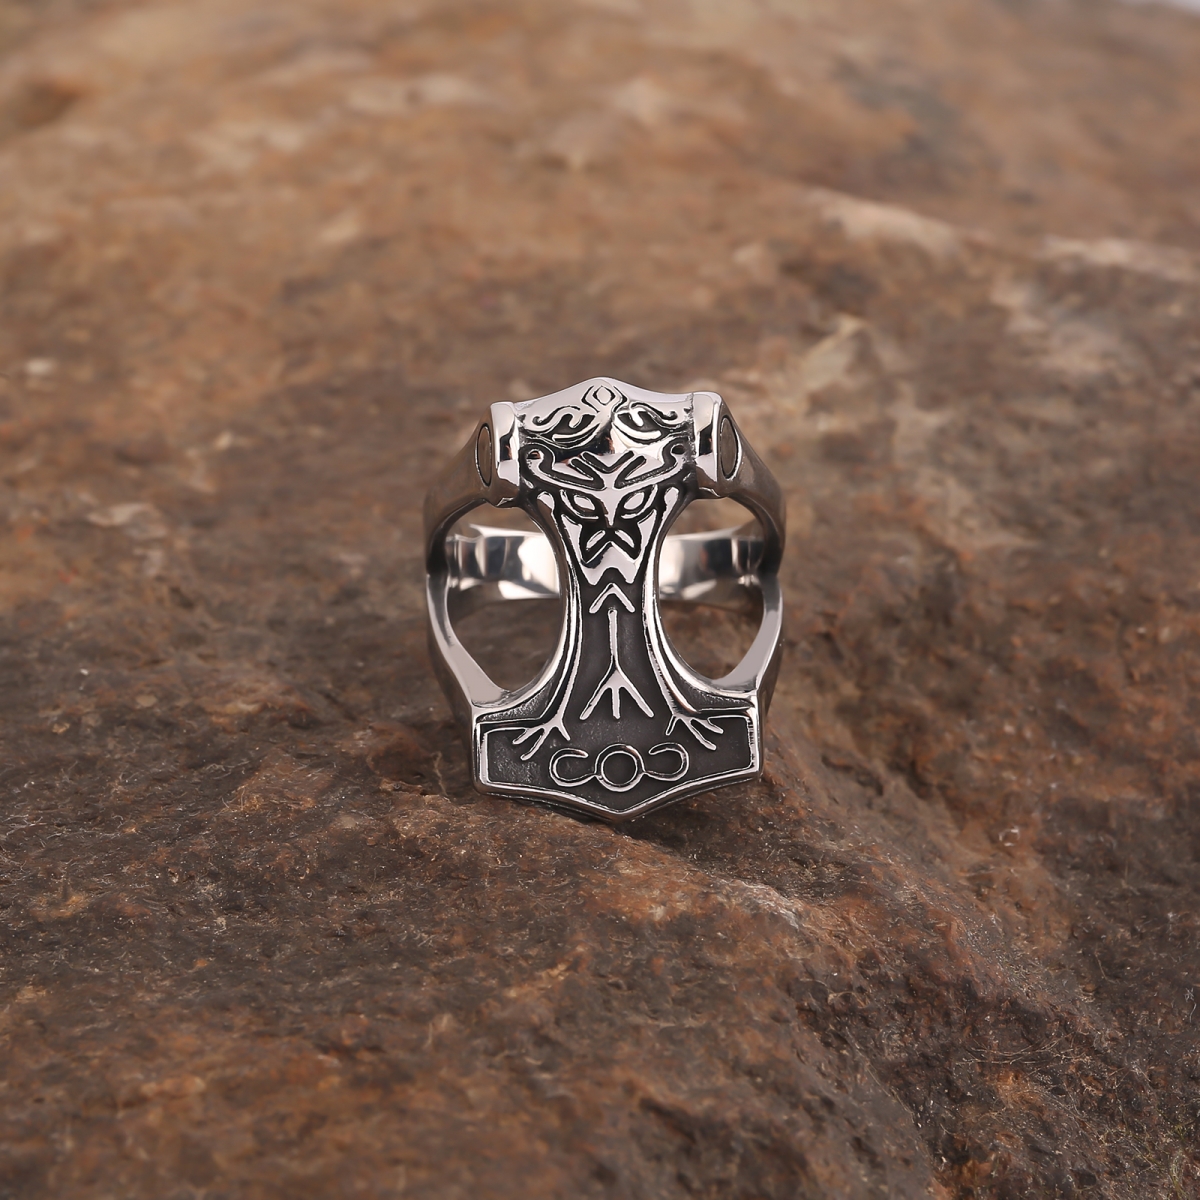 Mjolnir-ring US$2.9/PC-NORSECOLLECTION- Viking-sieraden, Viking-ketting, Viking-armband, Viking-ringen, Viking-mokken, Viking-accessoires, Viking-ambachten